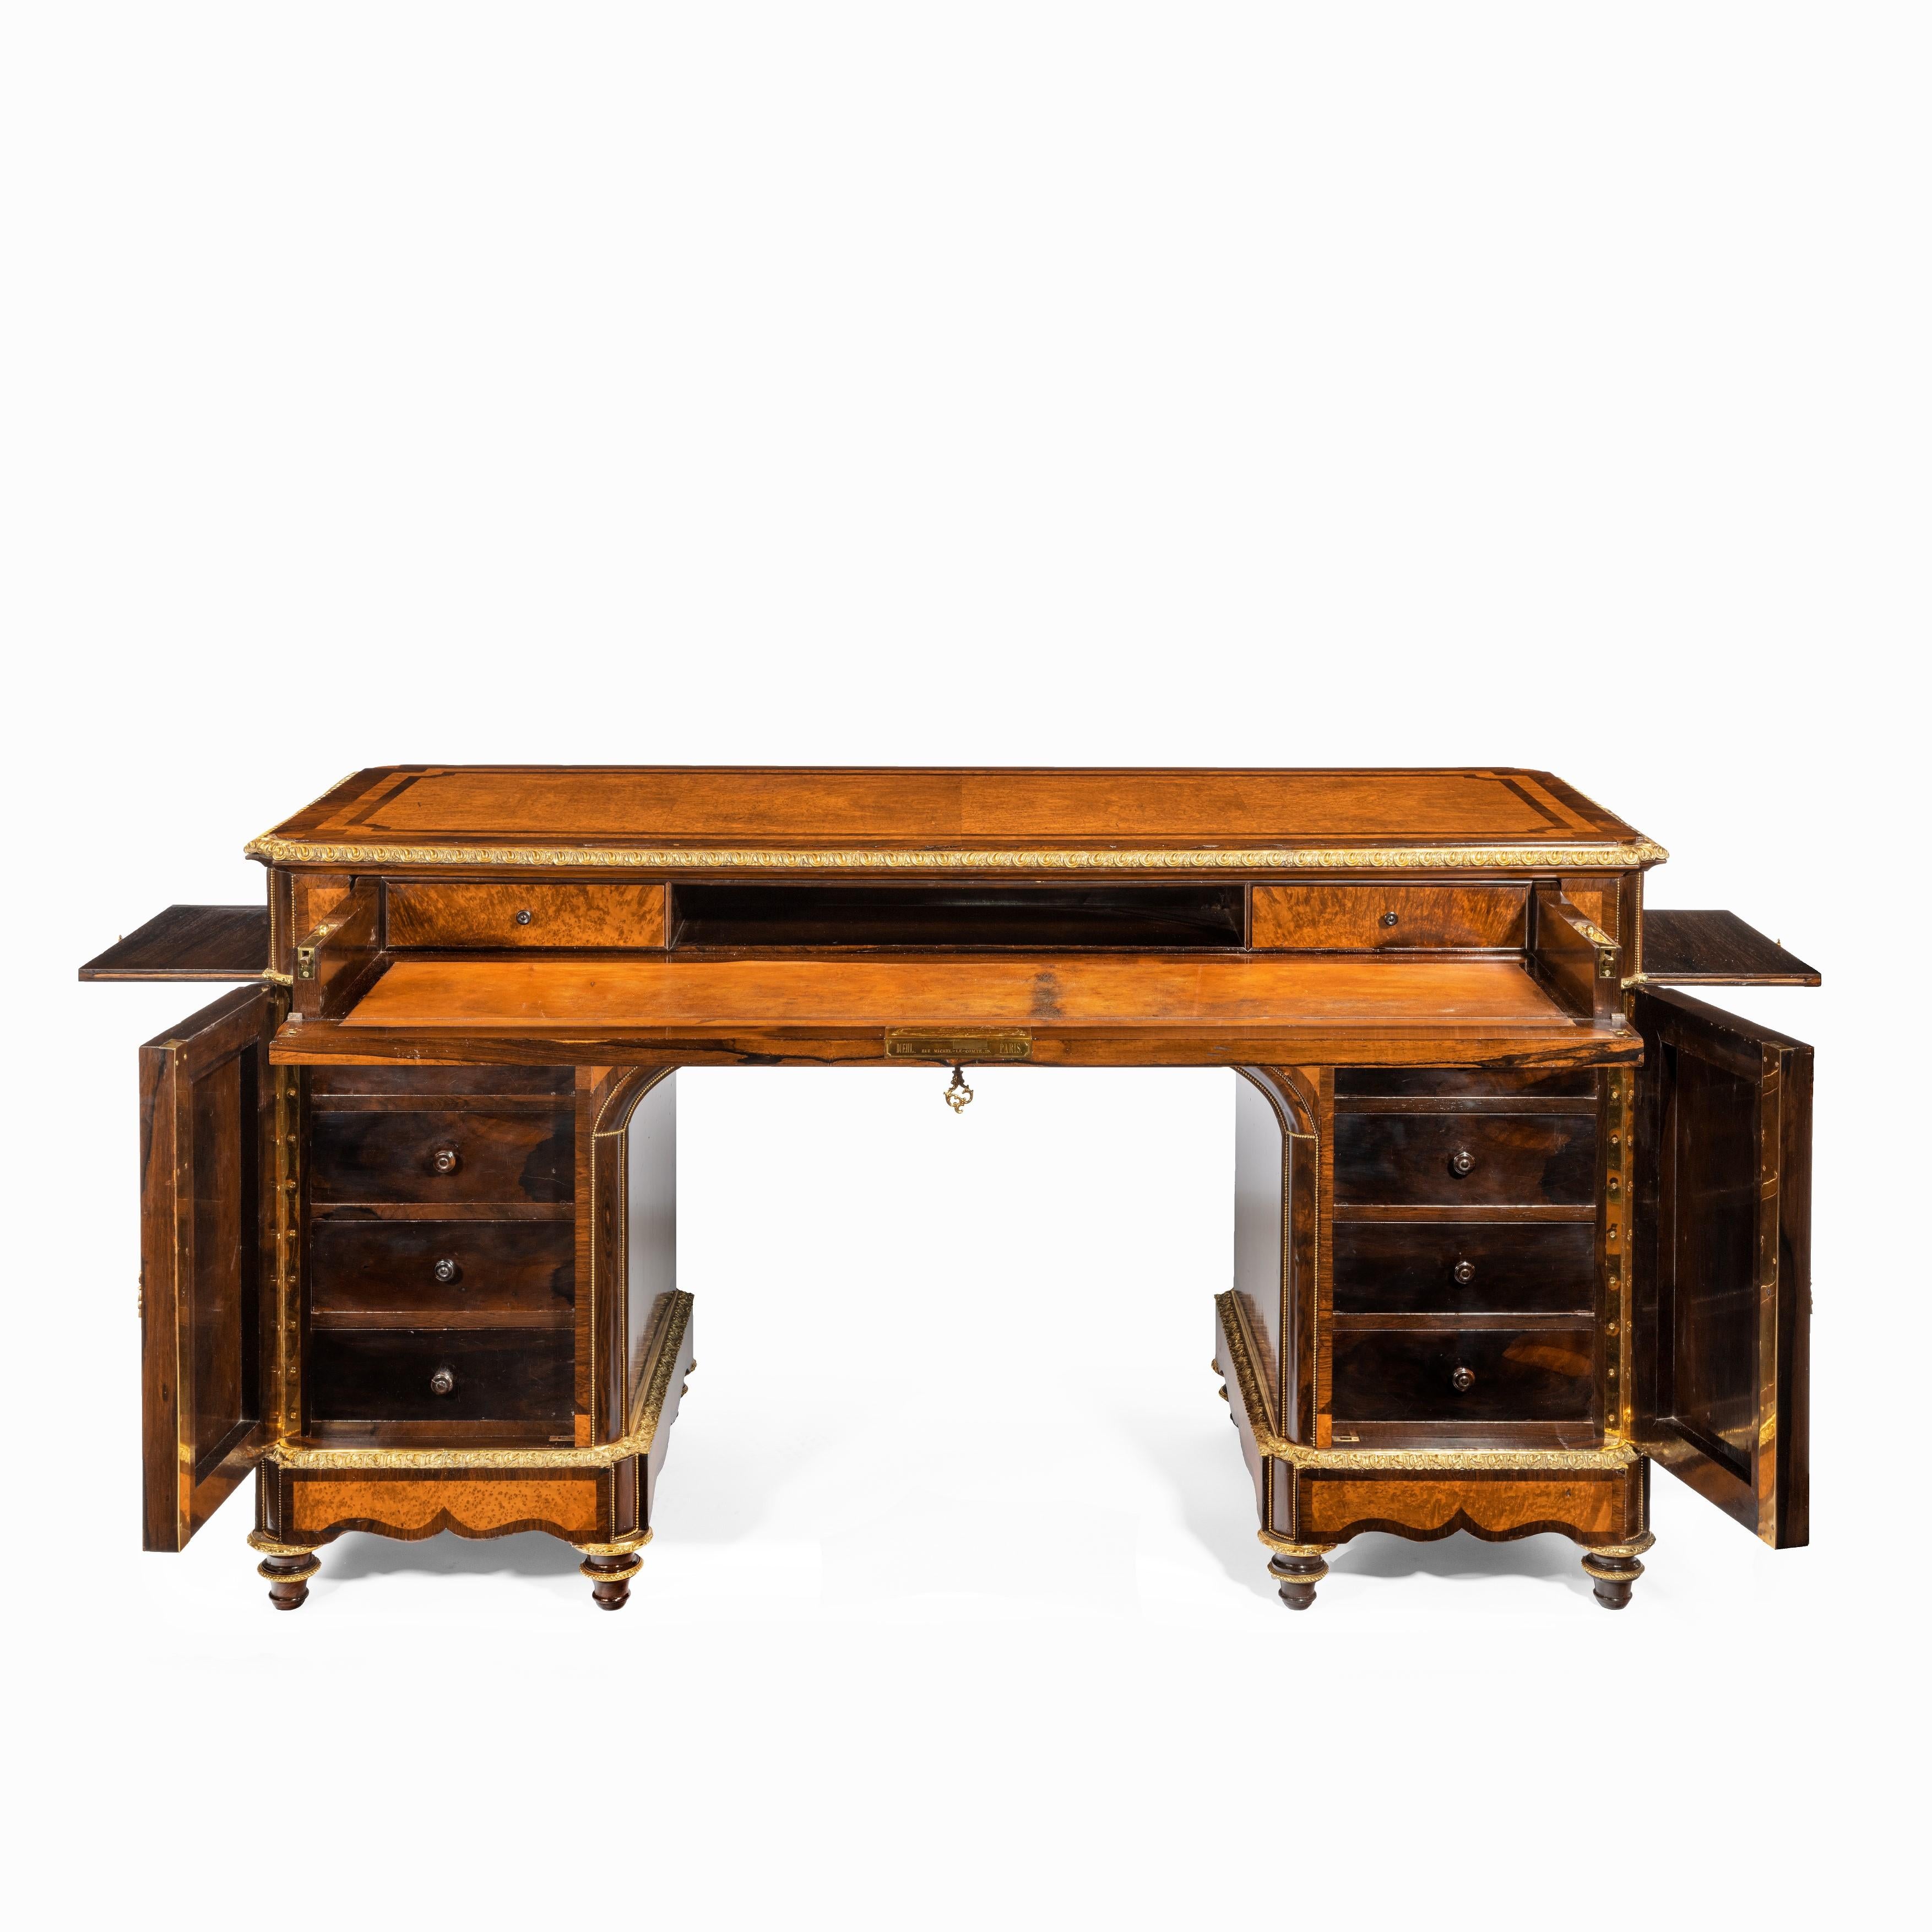 An unusual amboyna Napoleon III secretaire desk by Diehl, the rectangular top above a single long frieze drawer which opens to reveal a leather-inset secretaire with a pigeonhole flanked by two small drawers, all above two pedestals, each enclosing